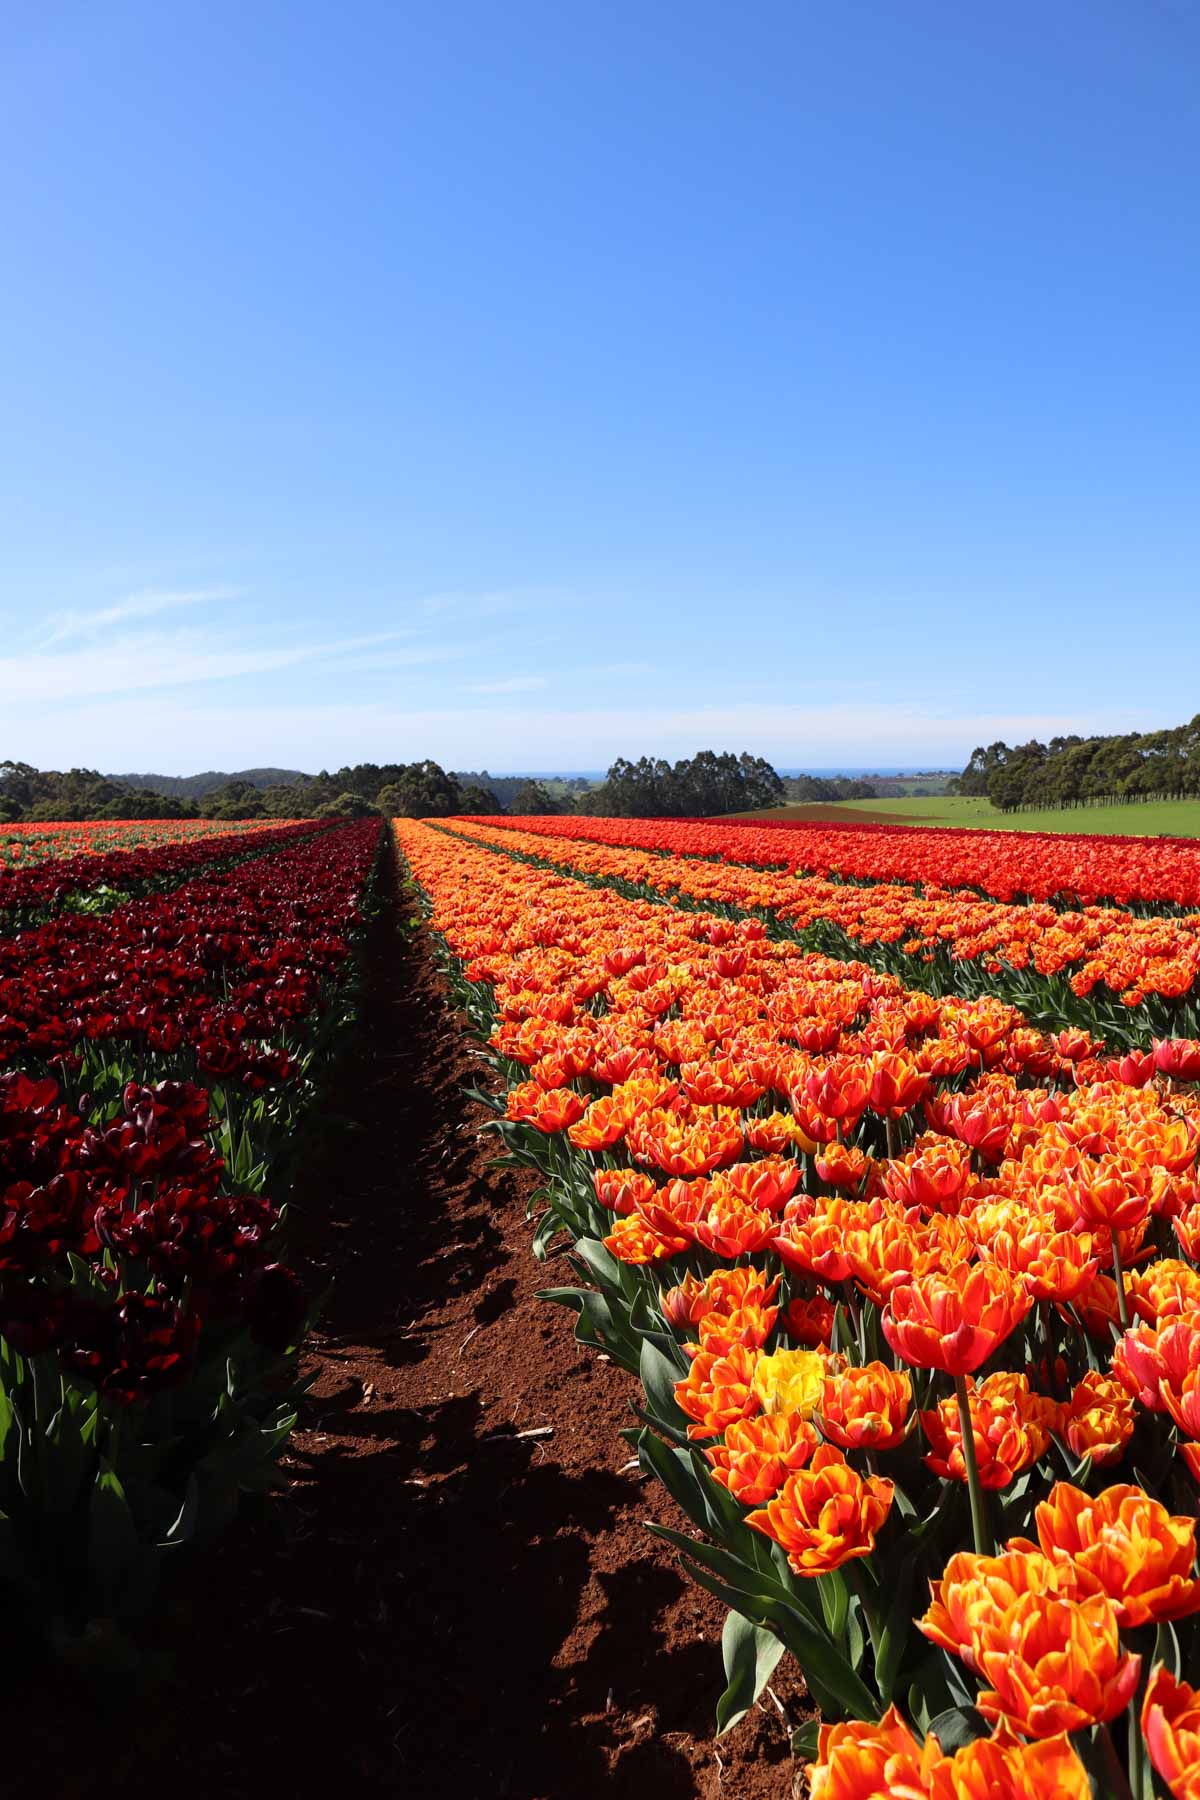 Capture yourself amidst blooming tulips on our exclusive farm tour. Limited spots available for a magical experience – book now!